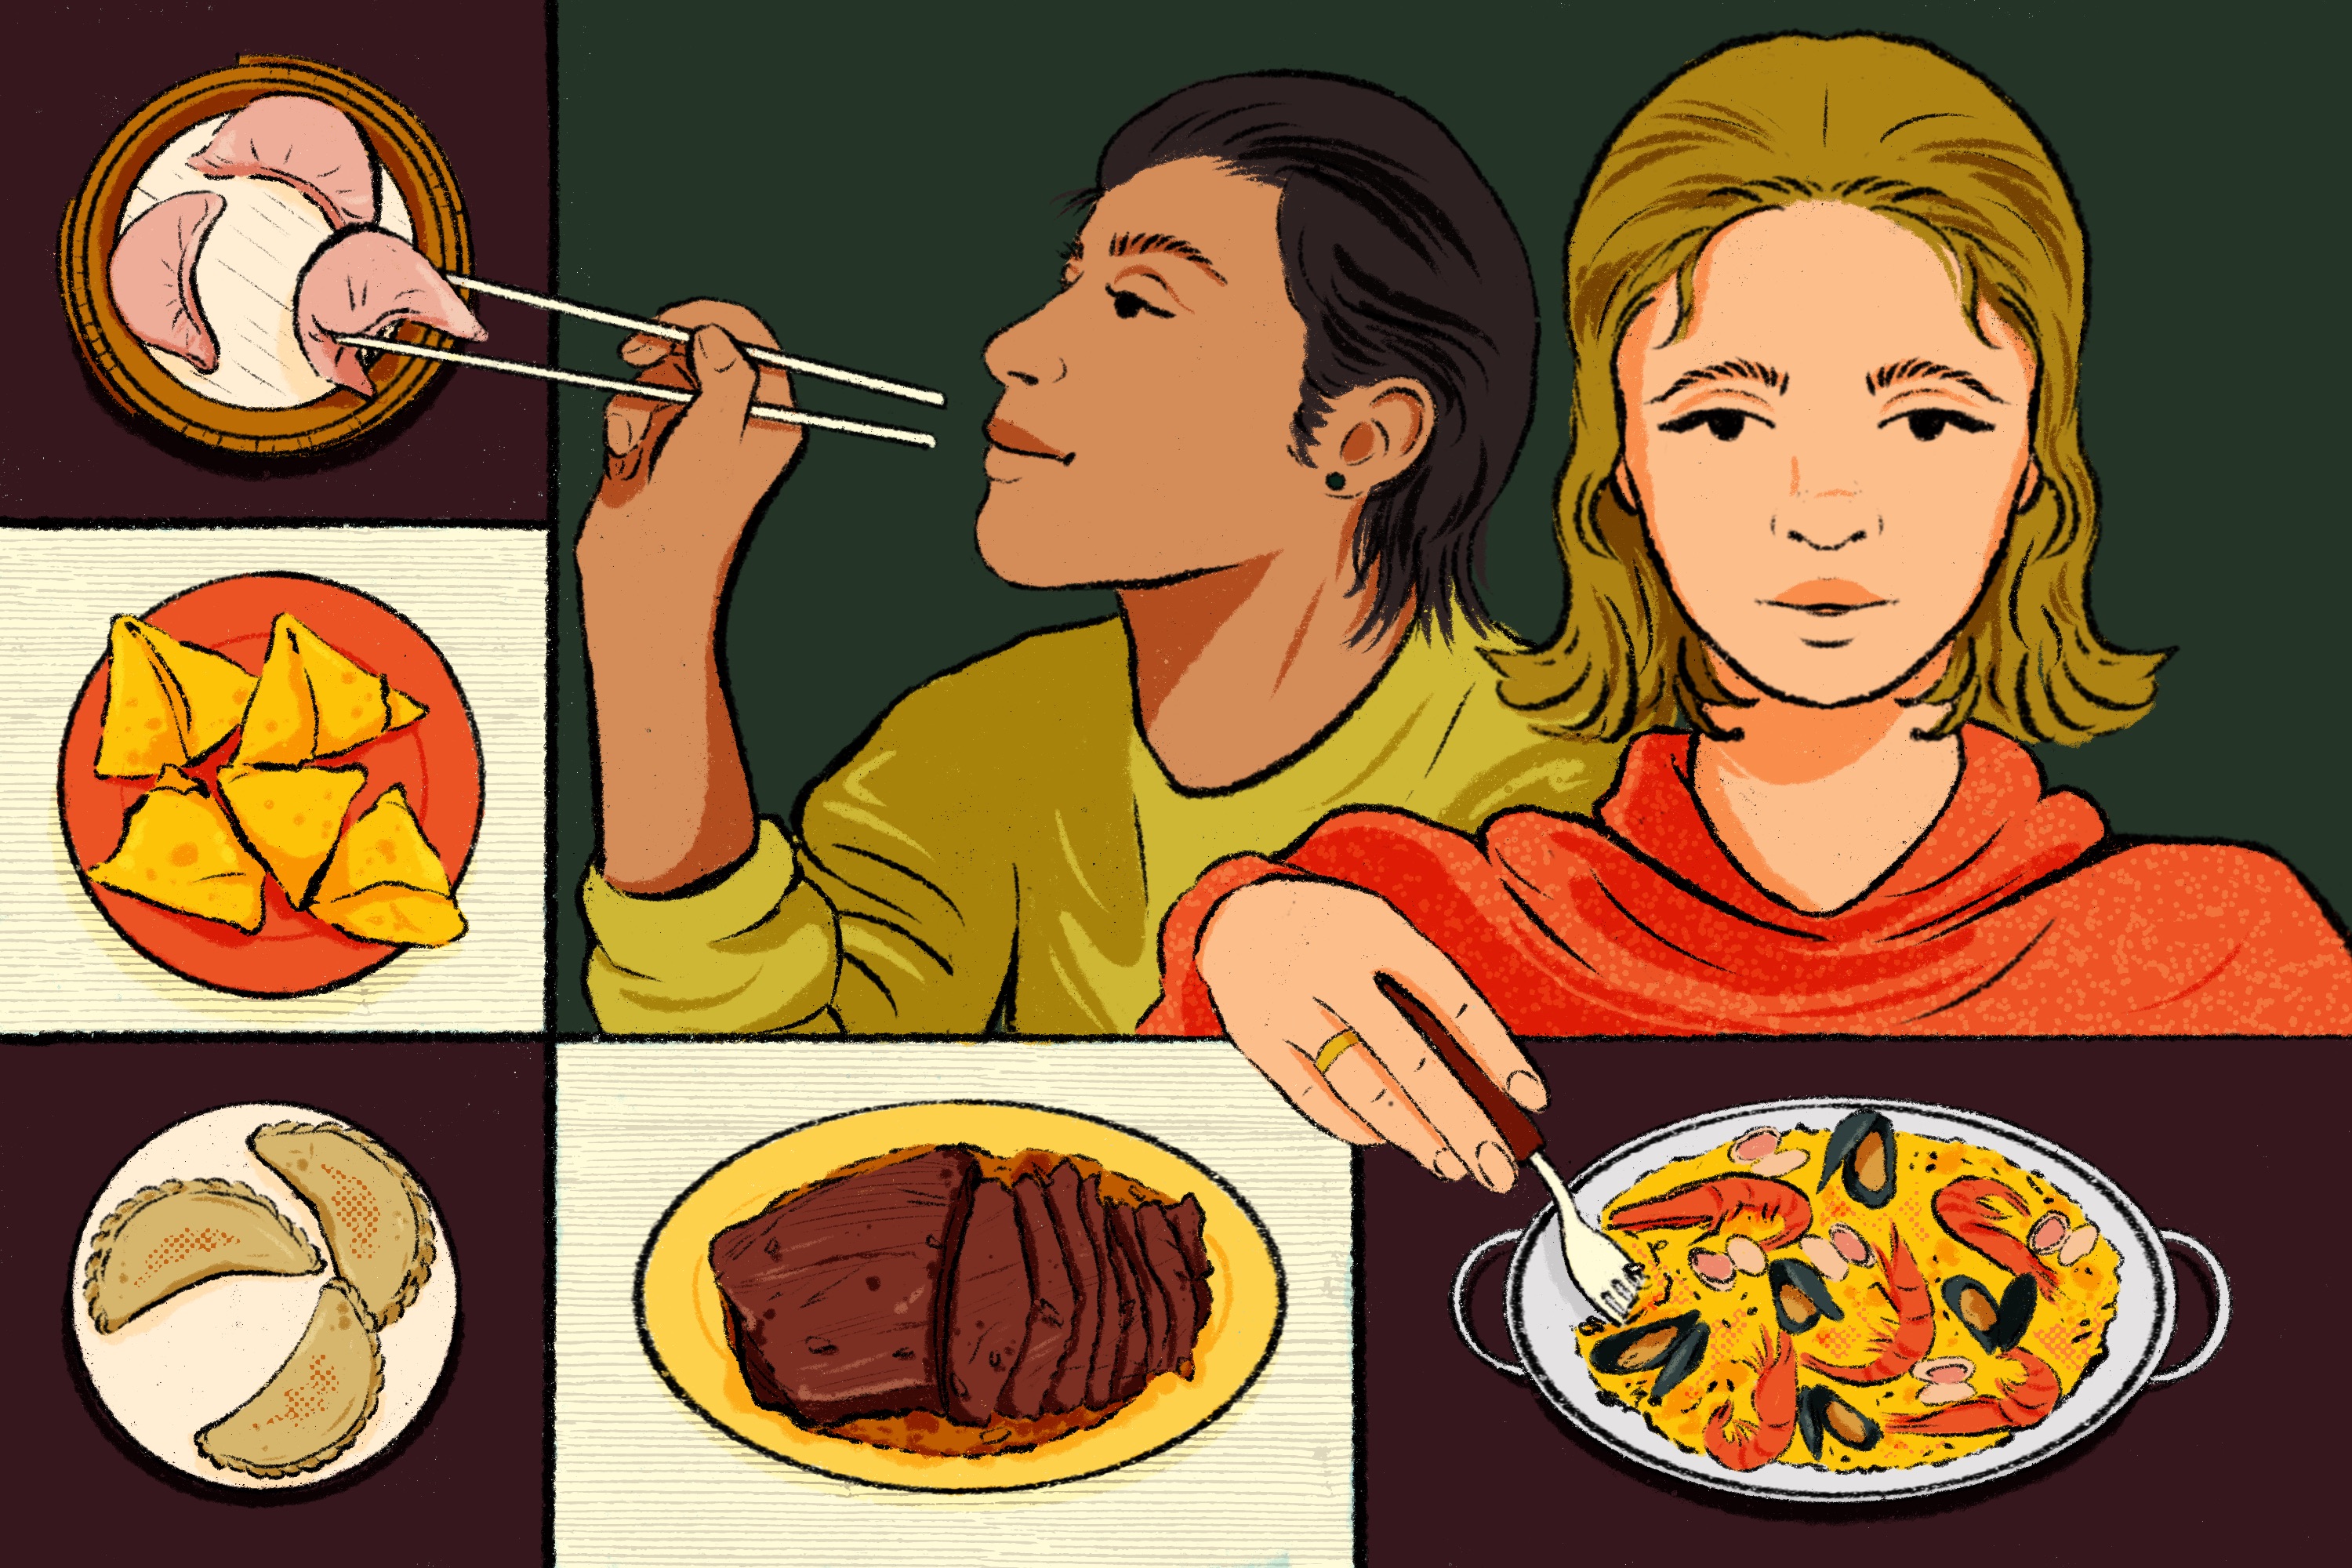 Illustration of two figures; one uses chopsticks to pick up a dumpling, while a woman pokes a fork into a paella.